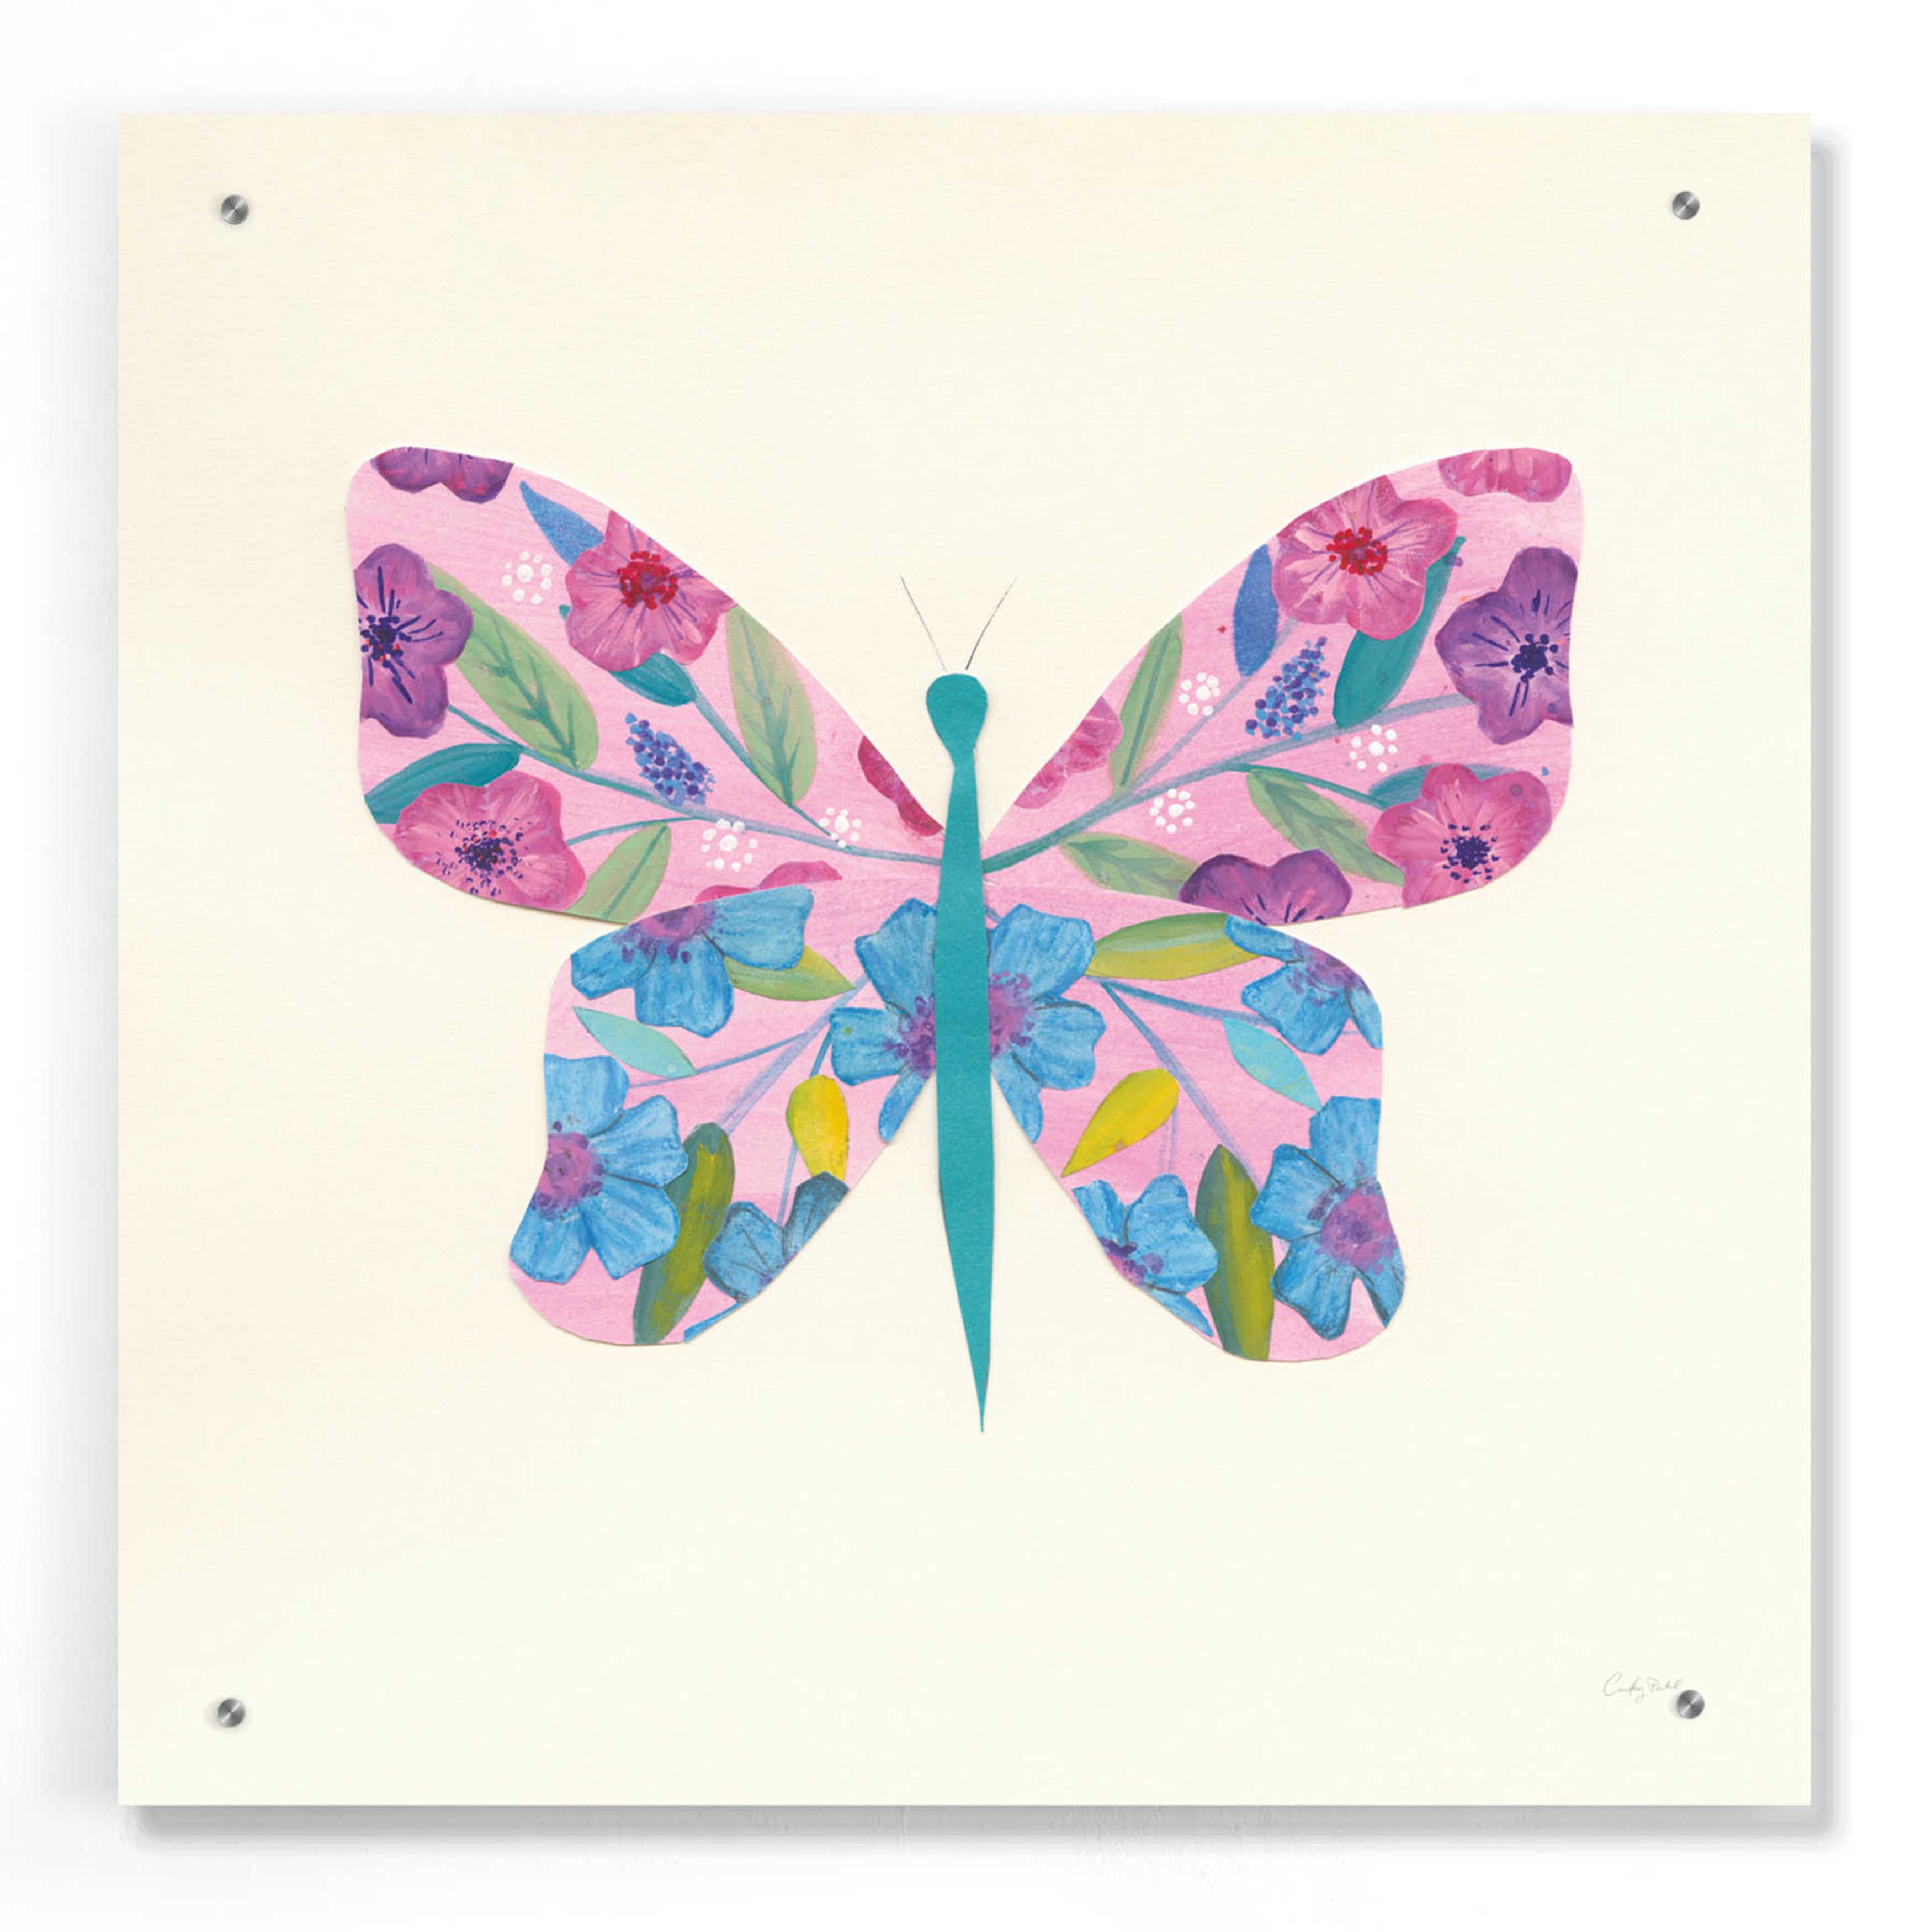 Set of 2/Butterfly/9x12 each/Original Watercolor/11x14 Black Mat Available